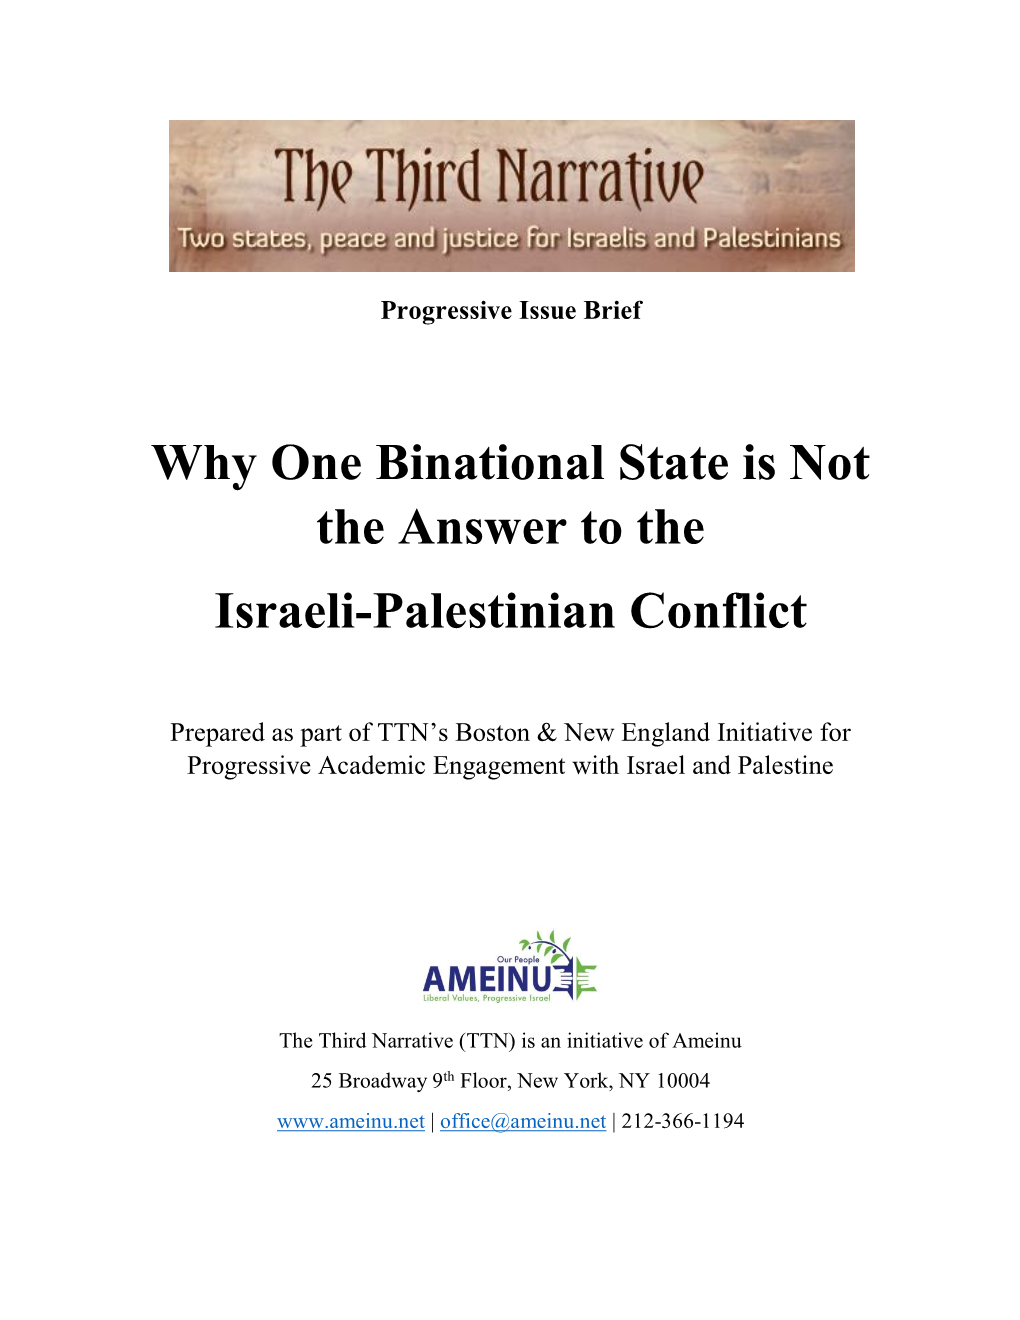 Why One Binational State Is Not the Answer to the Israeli-Palestinian